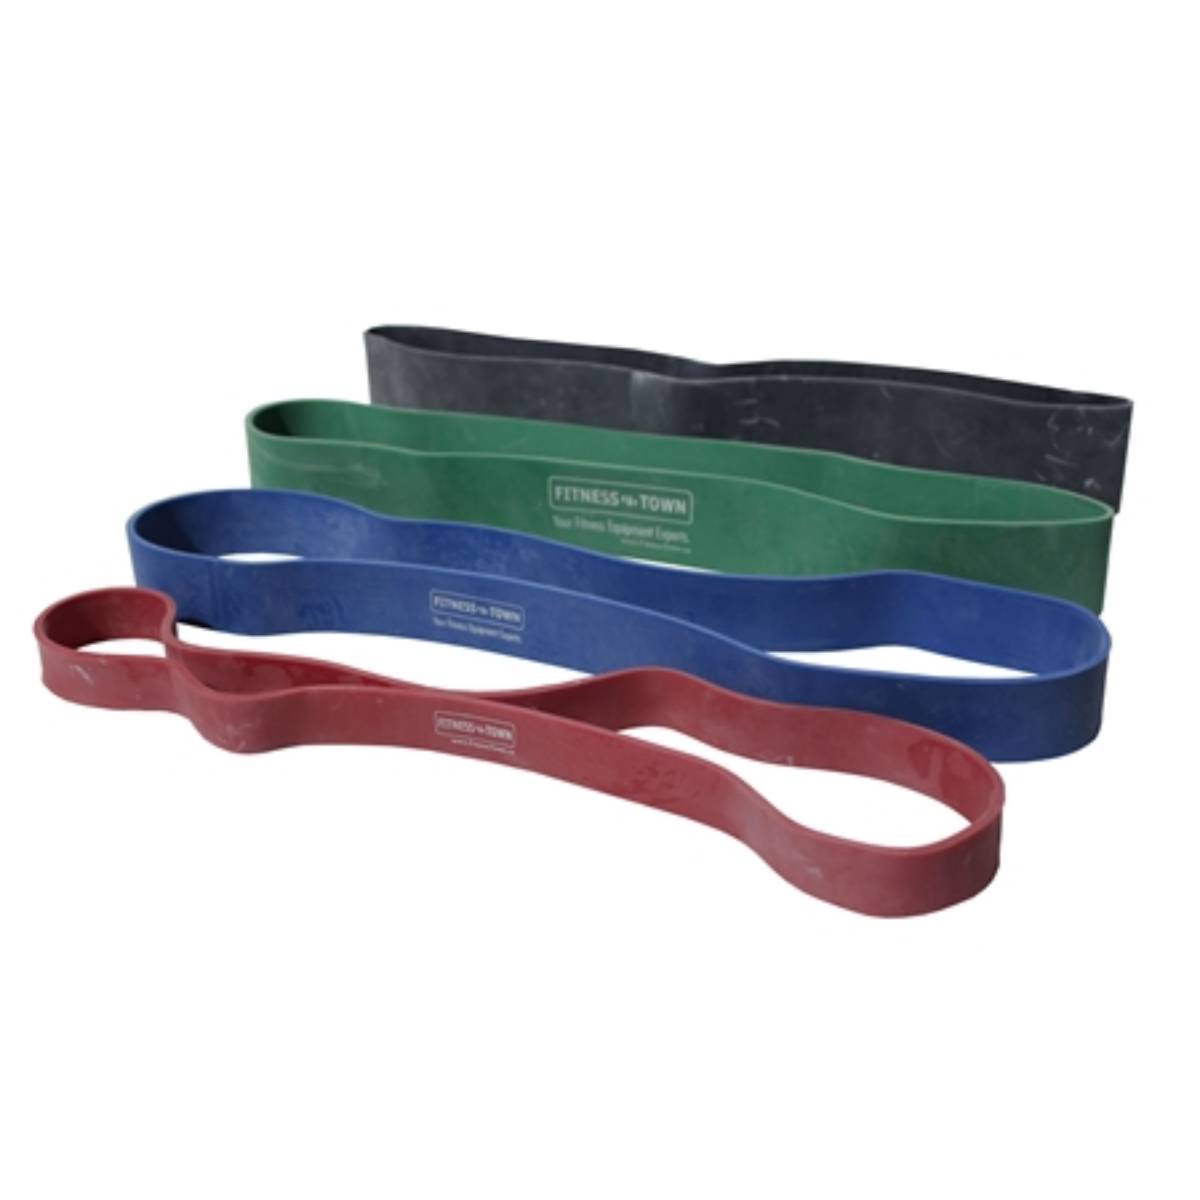 https://cdn.shopify.com/s/files/1/0553/4567/6427/products/SW-20Stretchwell-20-inch-bands-color-coded-resistance_1200x1200_crop_center.jpg?v=1660325872